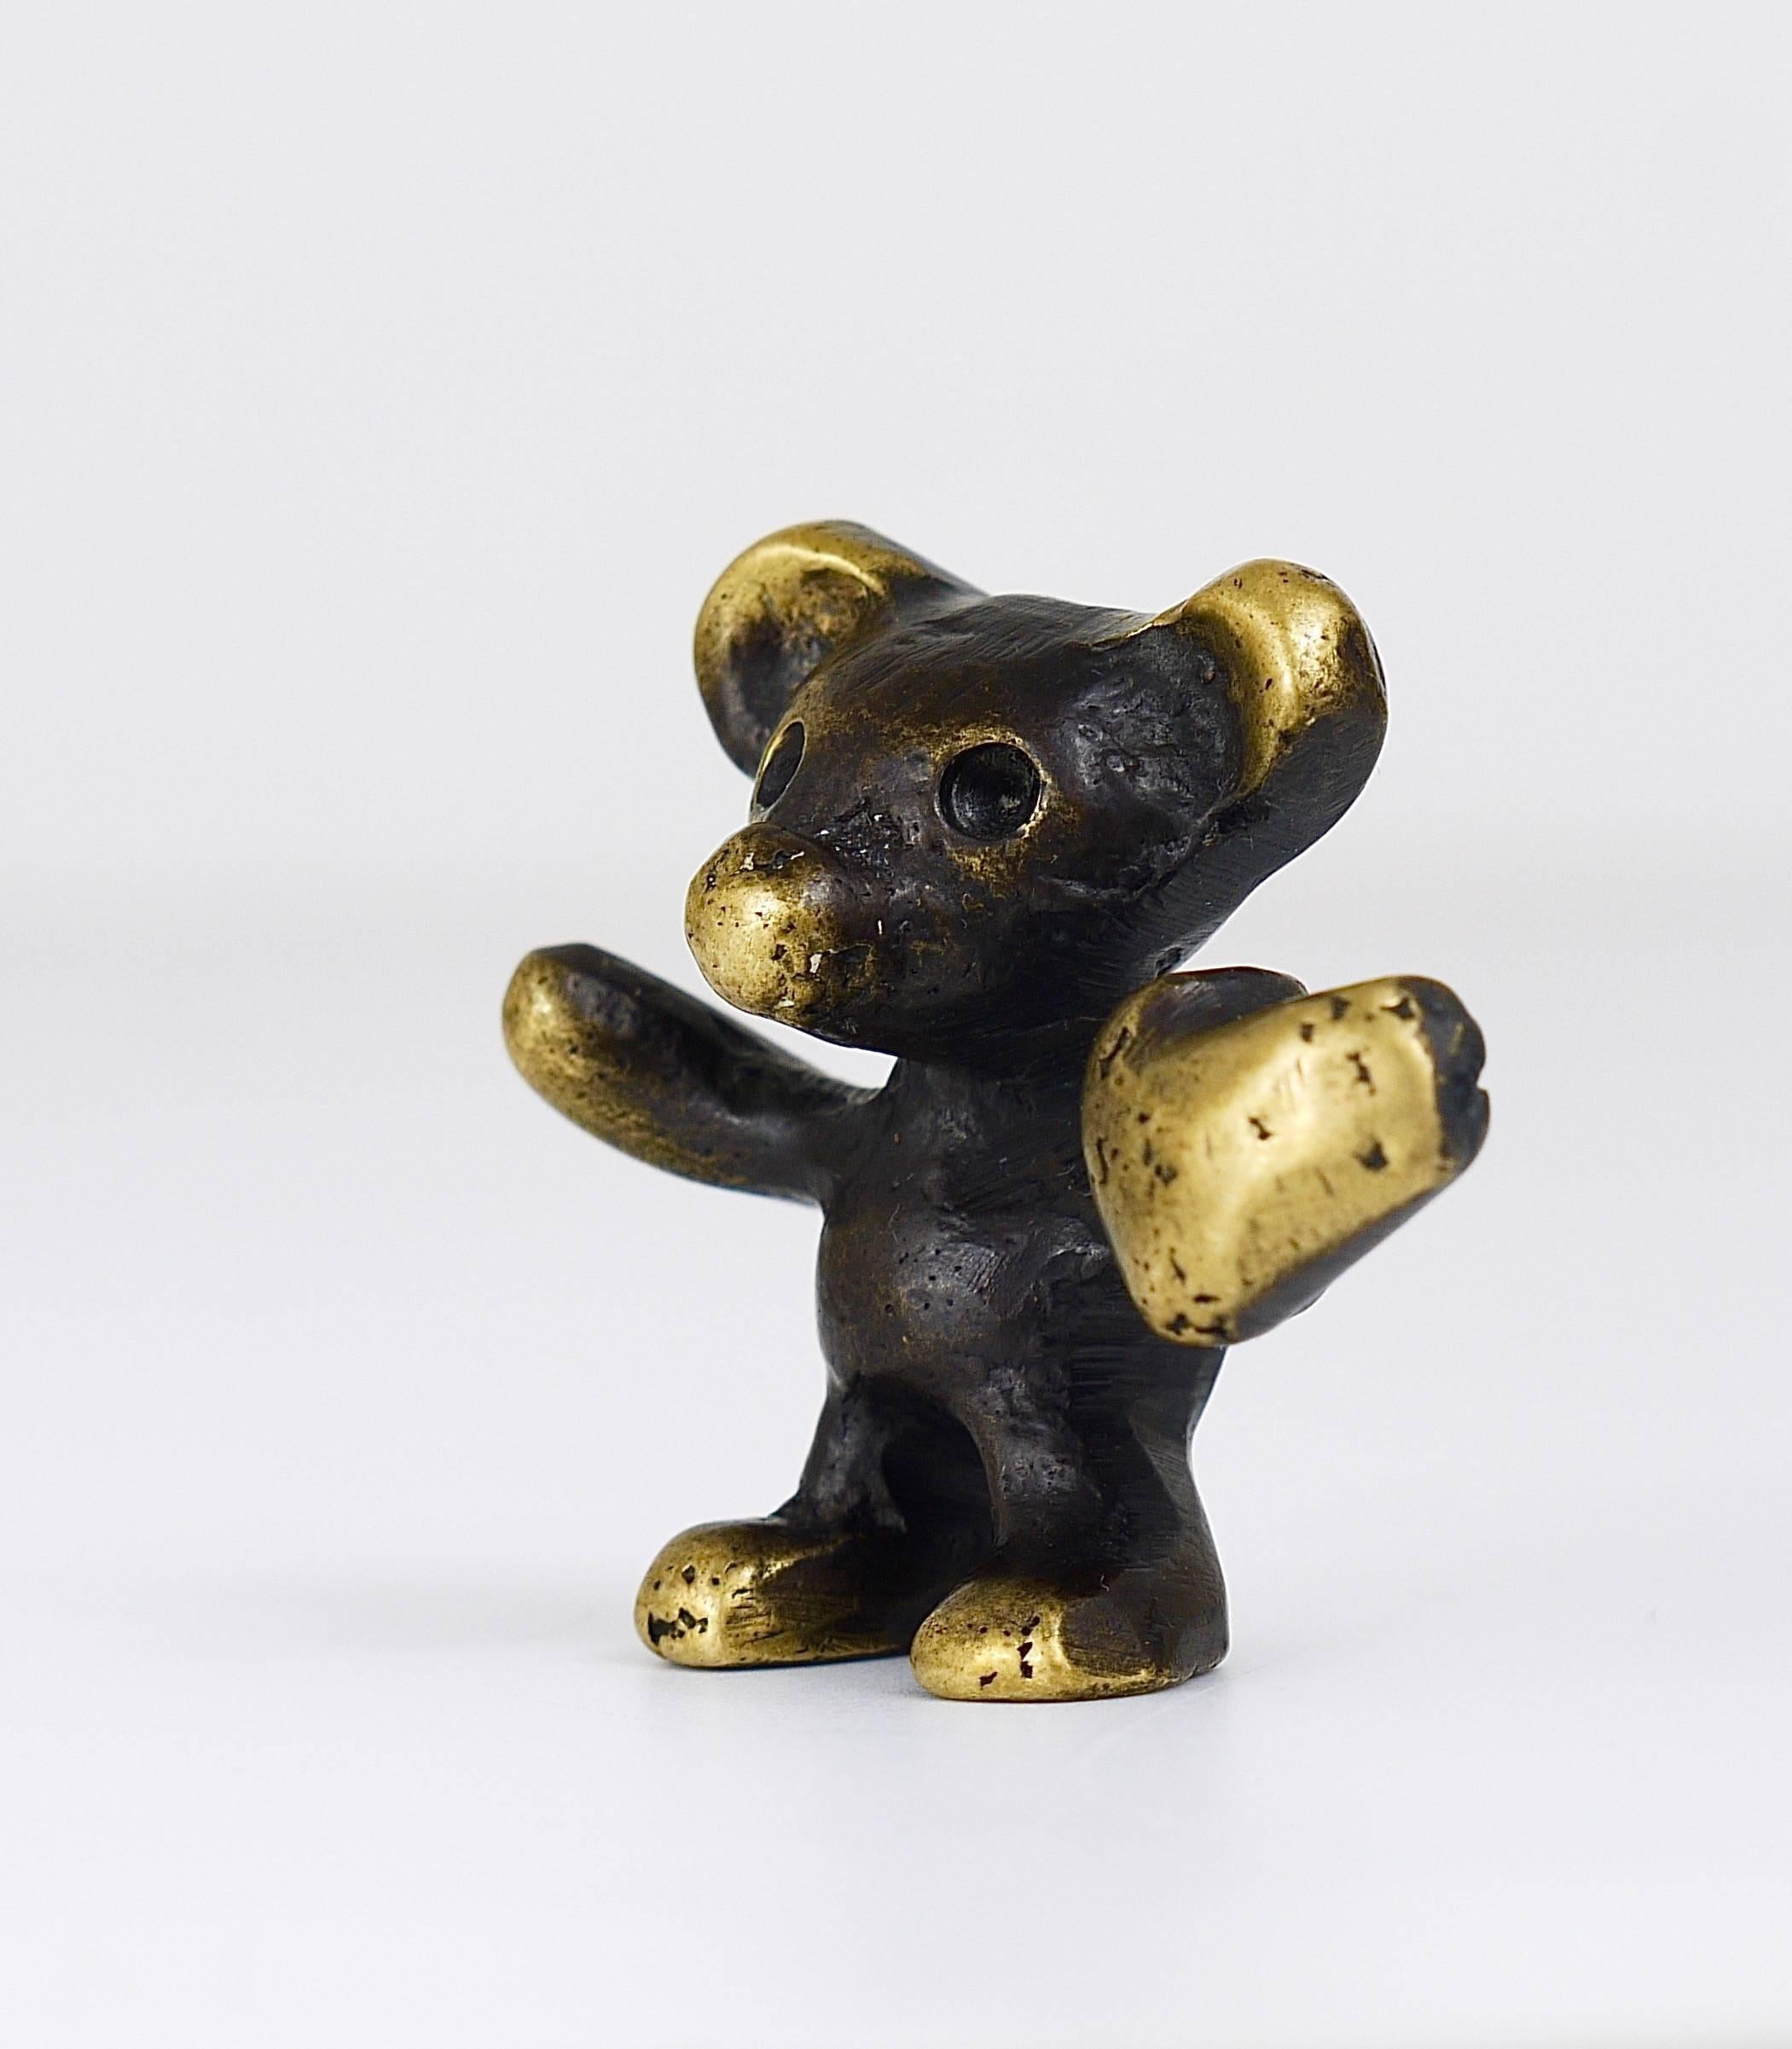 A lovely brass figurine, displaying a little bear with a heart in his hand. Designed by Walter Bosse, executed in the 1950s by Hertha Baller, Austria. In very good condition. We offer other Walter Bosse brass objects in our other listings.